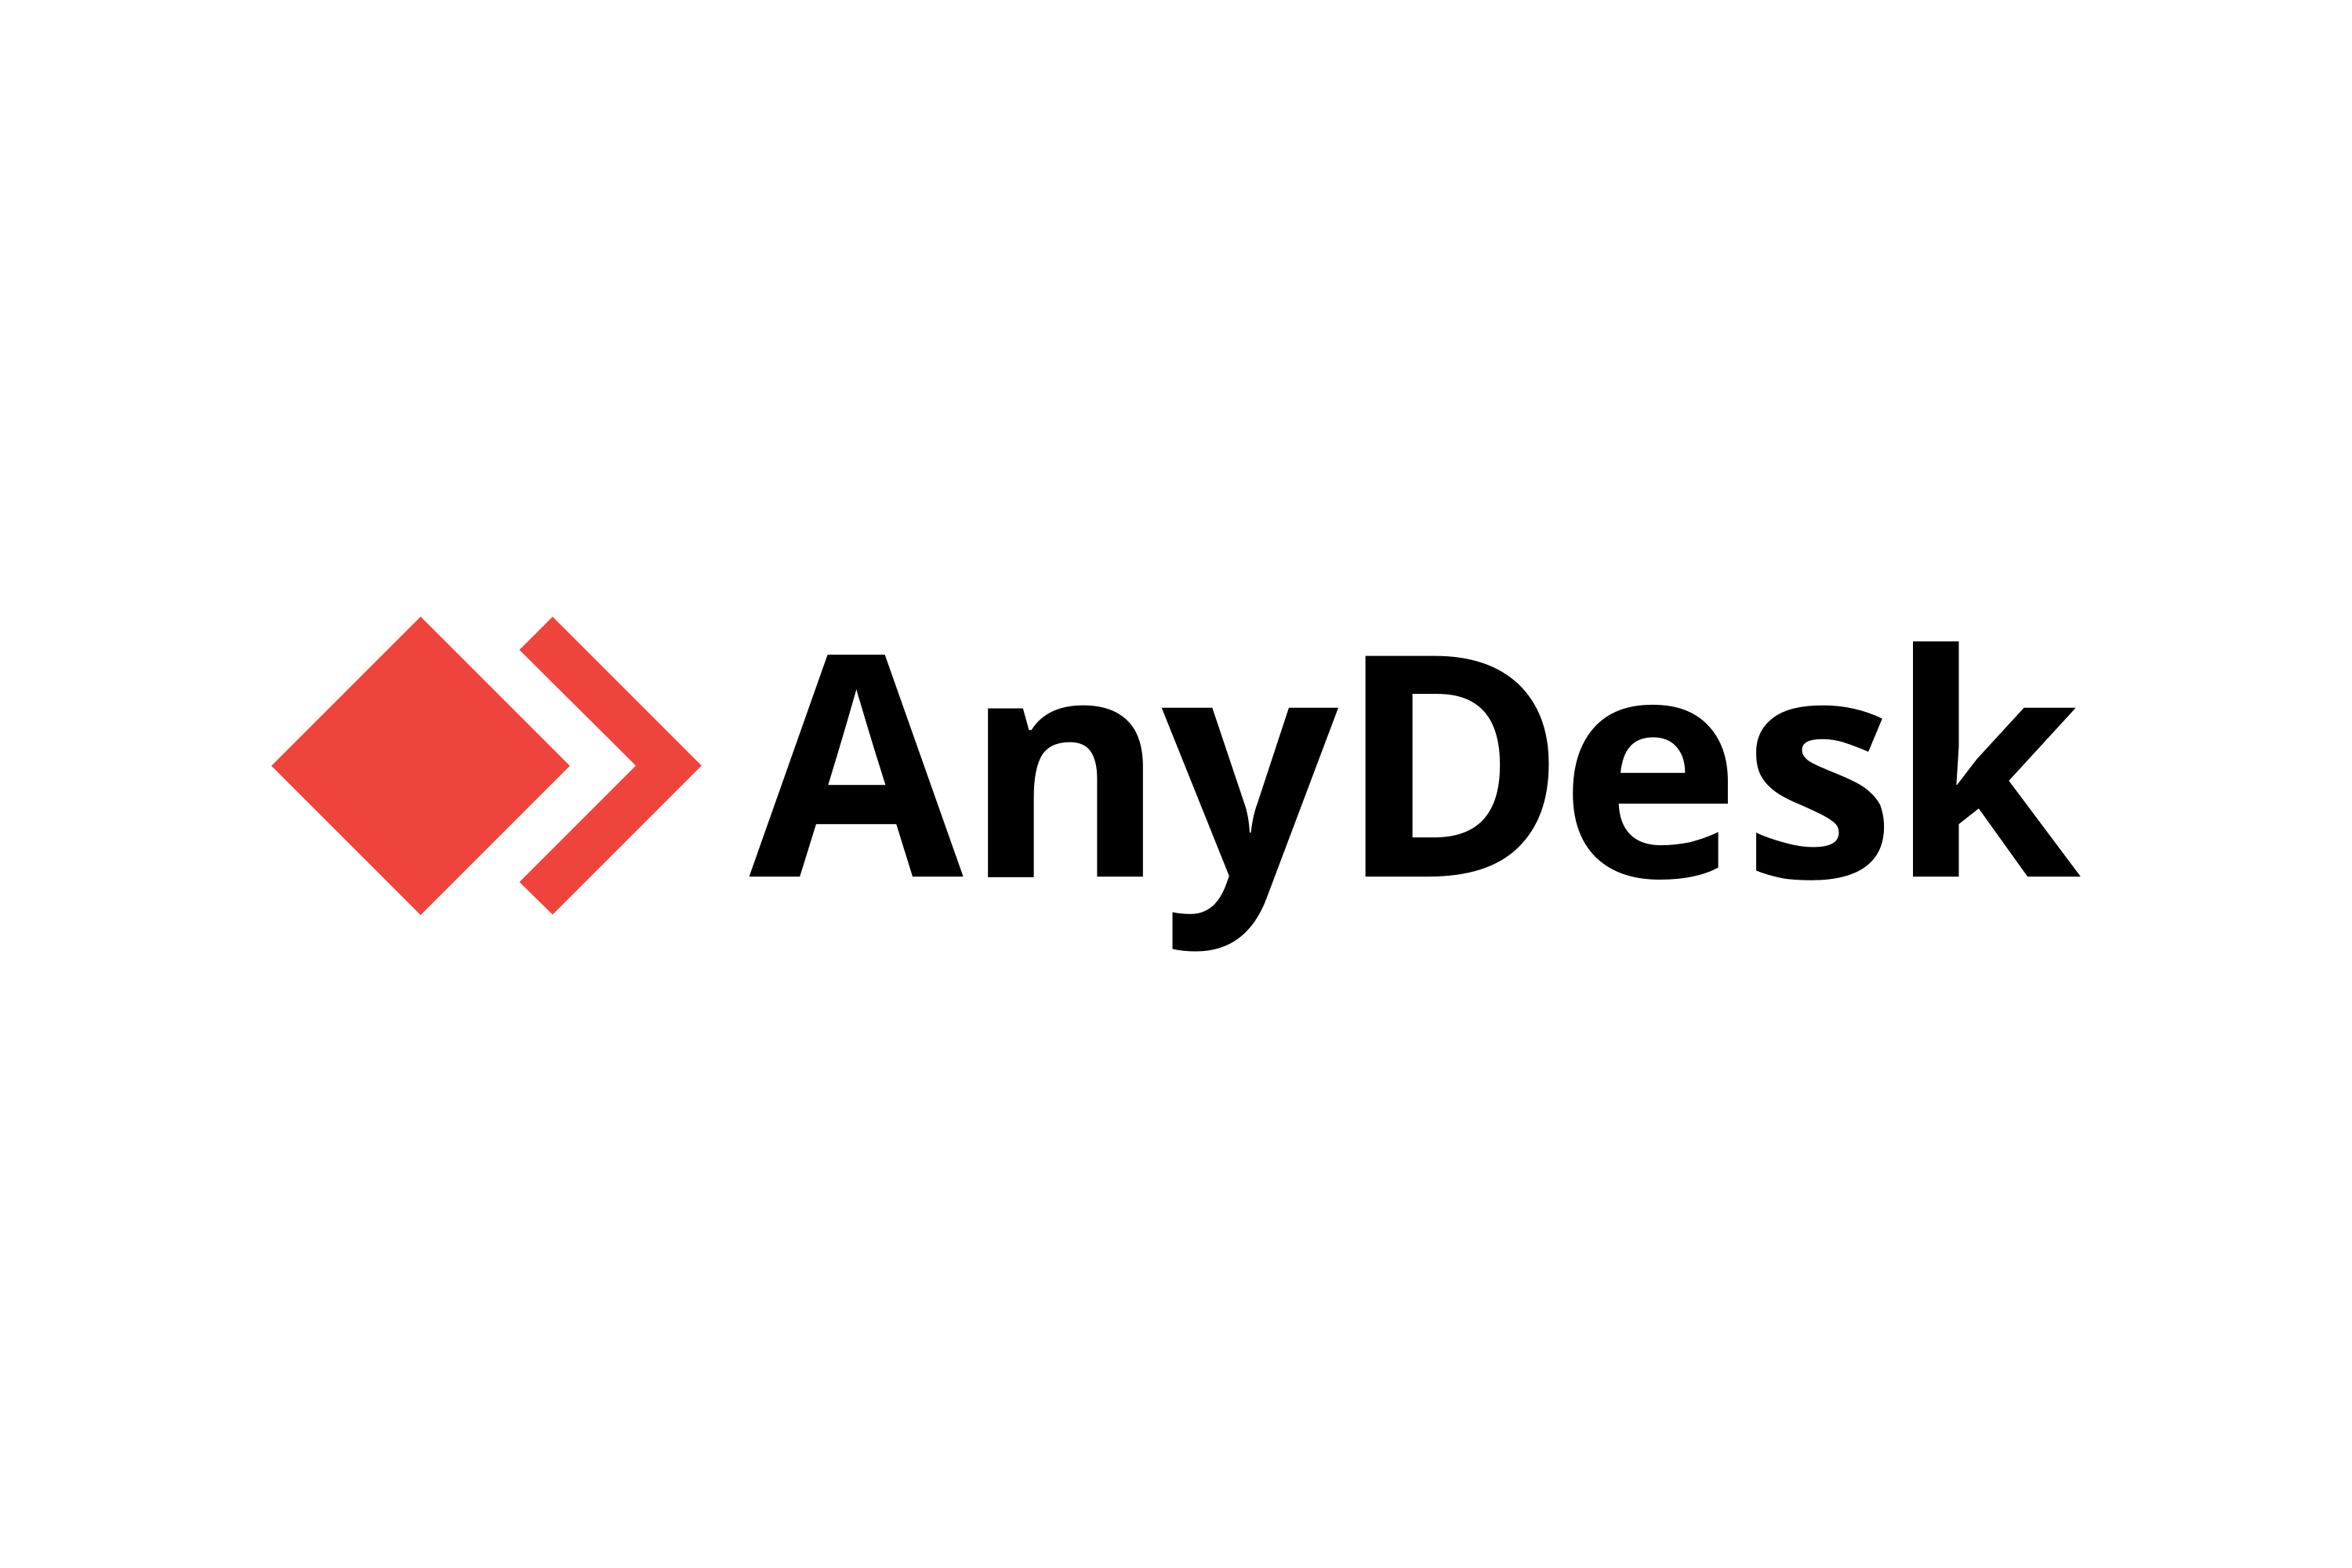 Download Our Anydesk Software 